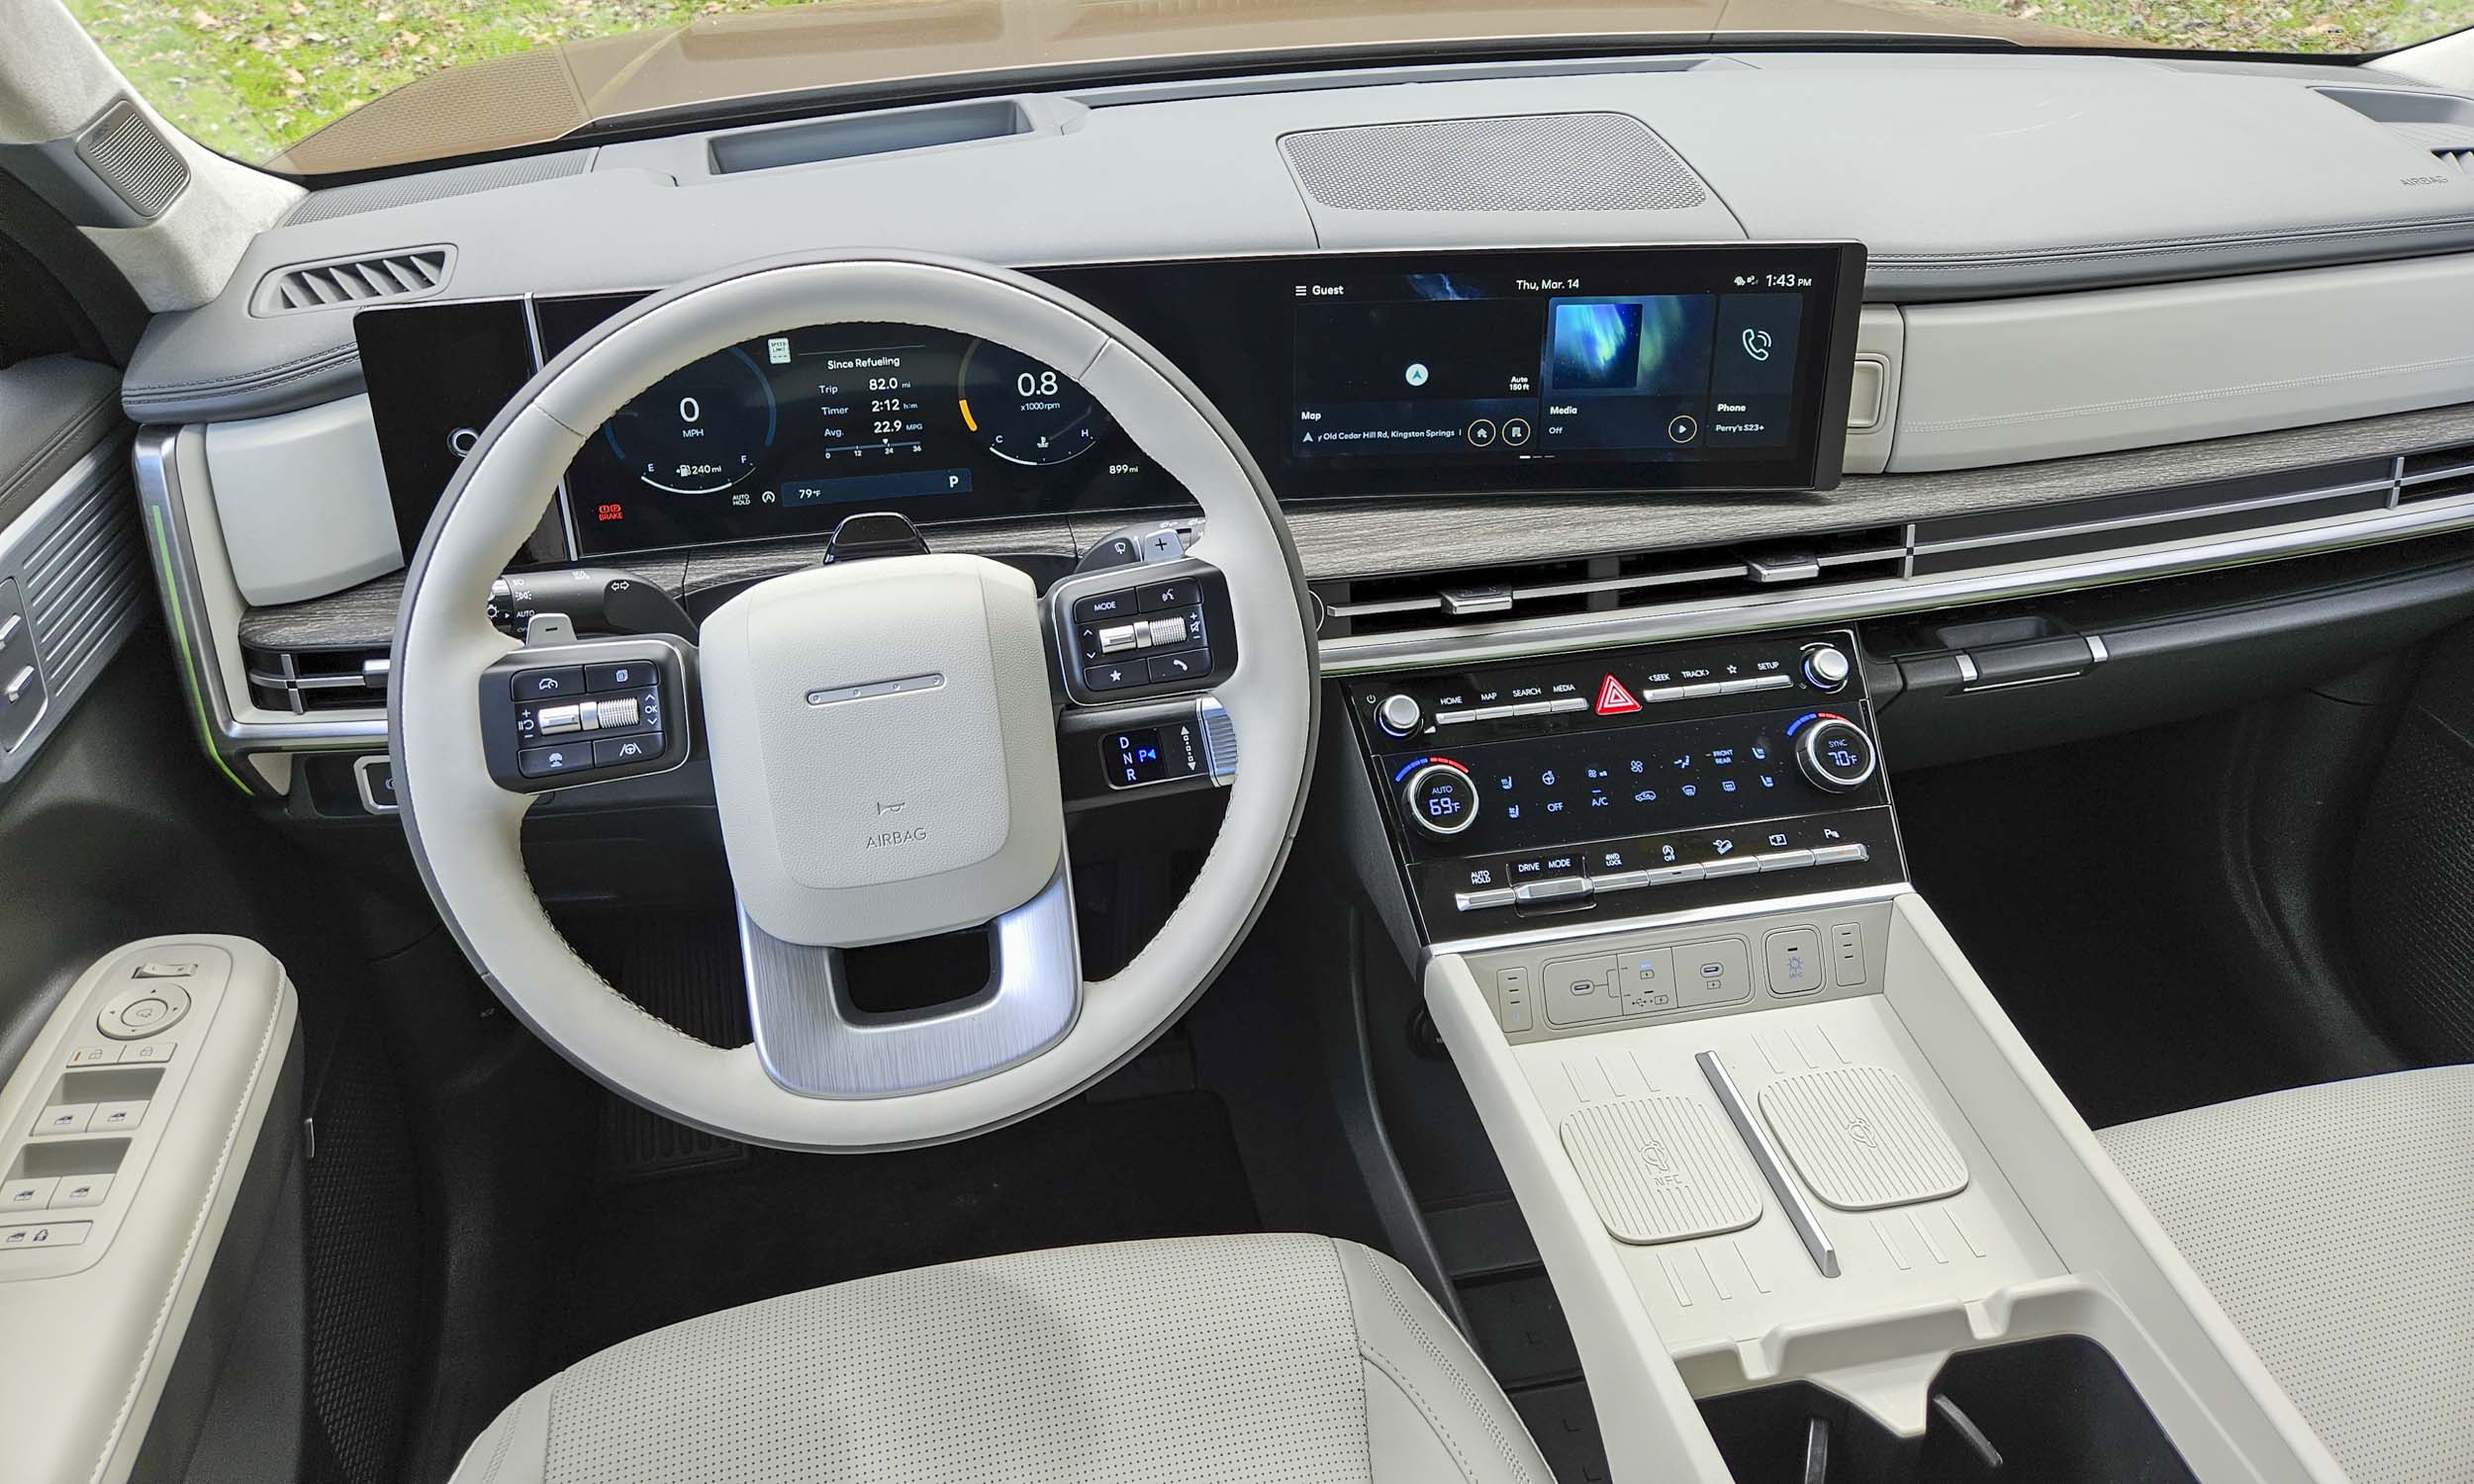 <p>          As part of the redesign, the gear selector has been moved to the steering column, freeing up space in the center console for additional storage. A large space below the console offers room for a large bag or purse, while dual cupholders and available dual wireless phone chargers are easily accessed.         </p>